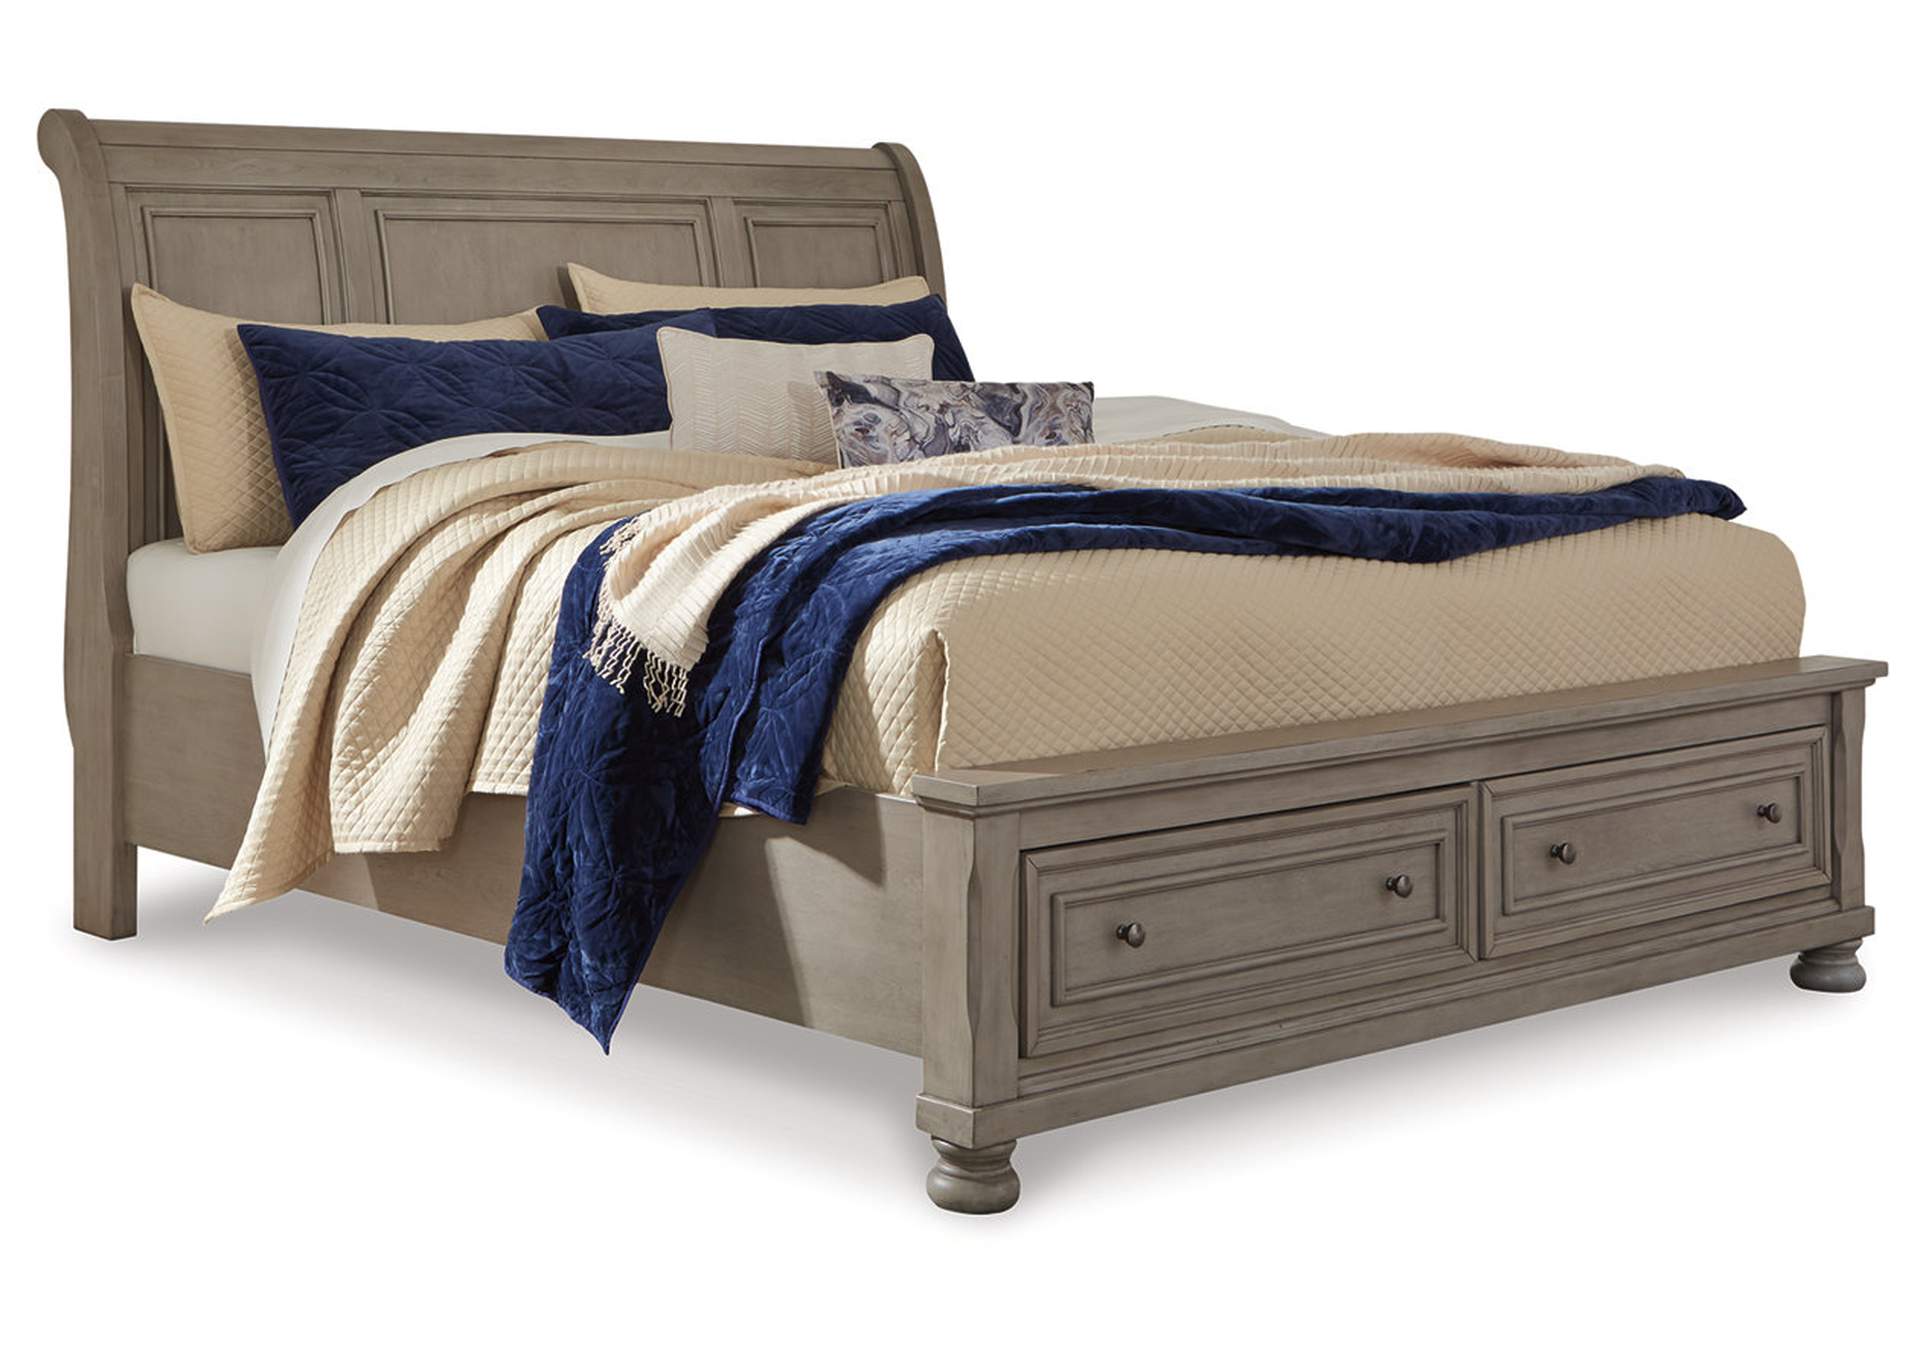 Lettner King Sleigh Bed with 2 Storage Drawers with Dresser,Signature Design By Ashley